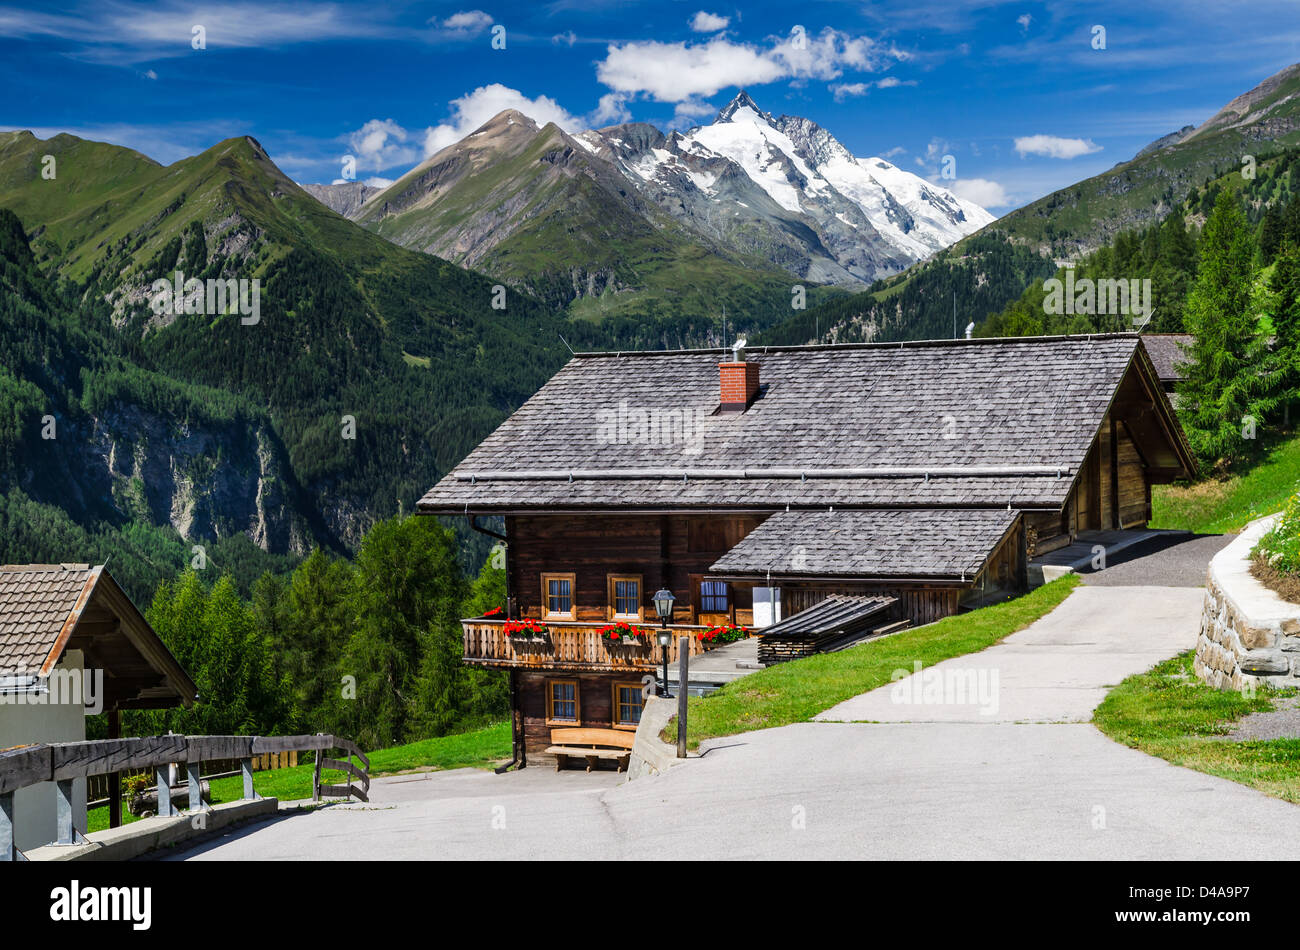 Rural landscape in Tirol Alps with the highest mountain from Austria in background, Grossglockner (3797 m. elevation) Stock Photo